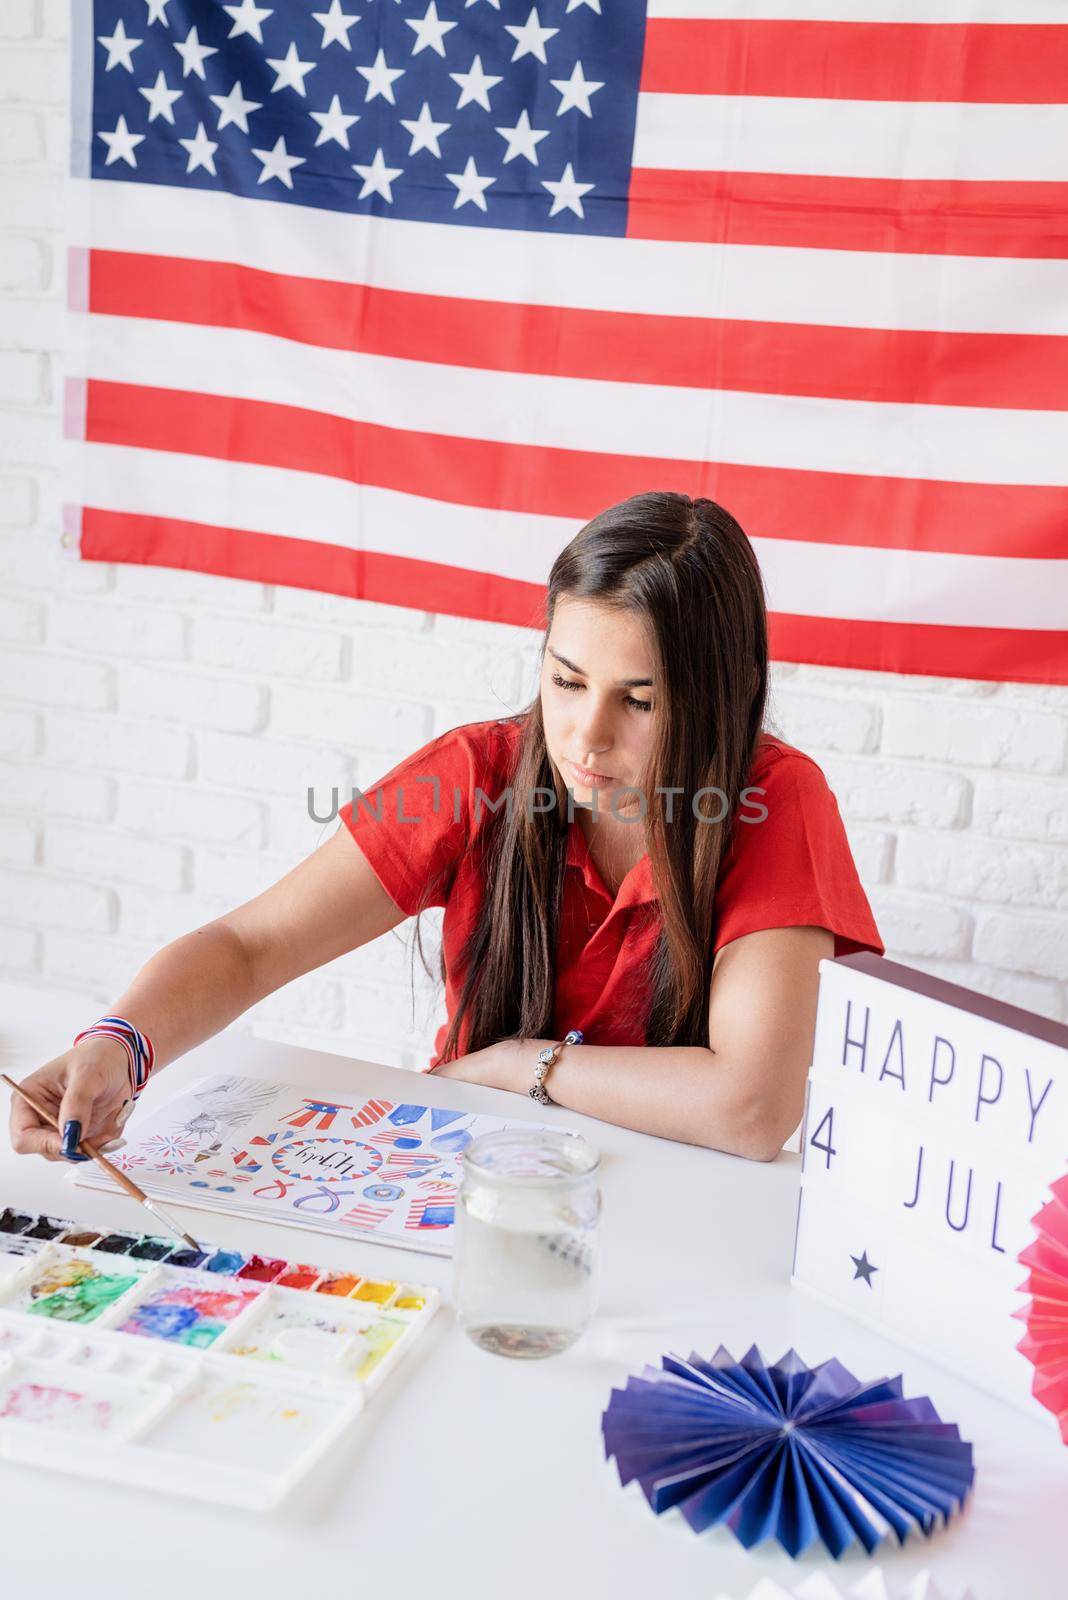 Independence day of the USA. Happy July 4th. Beautiful woman drawing a watercolor illustration for Independence day of the USA. Happy 4 July the text on the lightbox